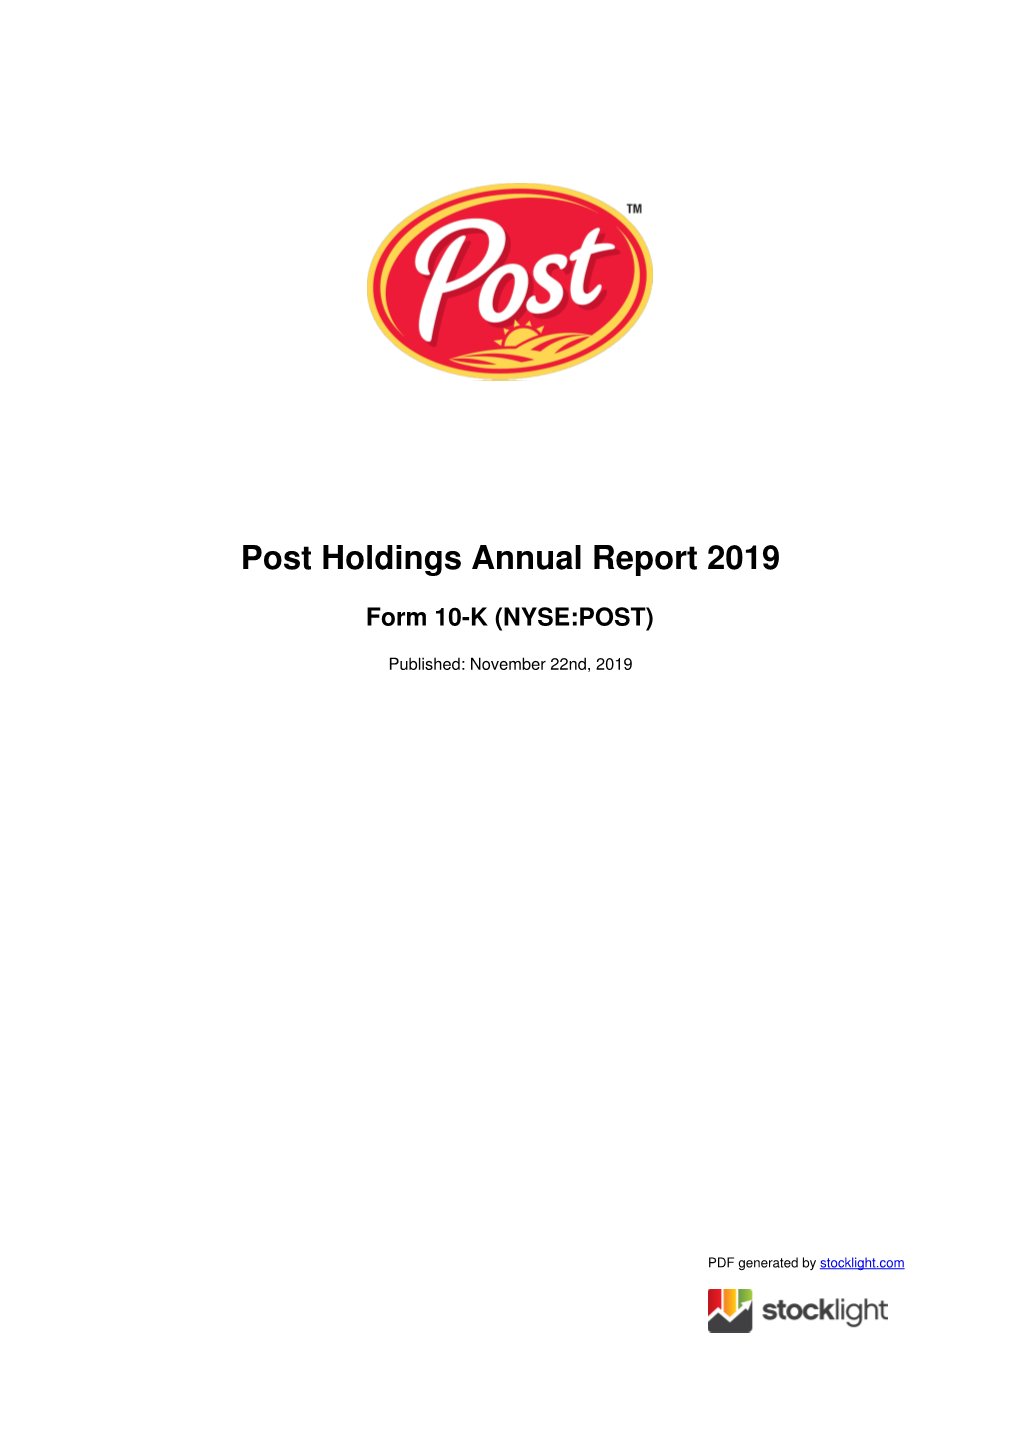 Post Holdings Annual Report 2019